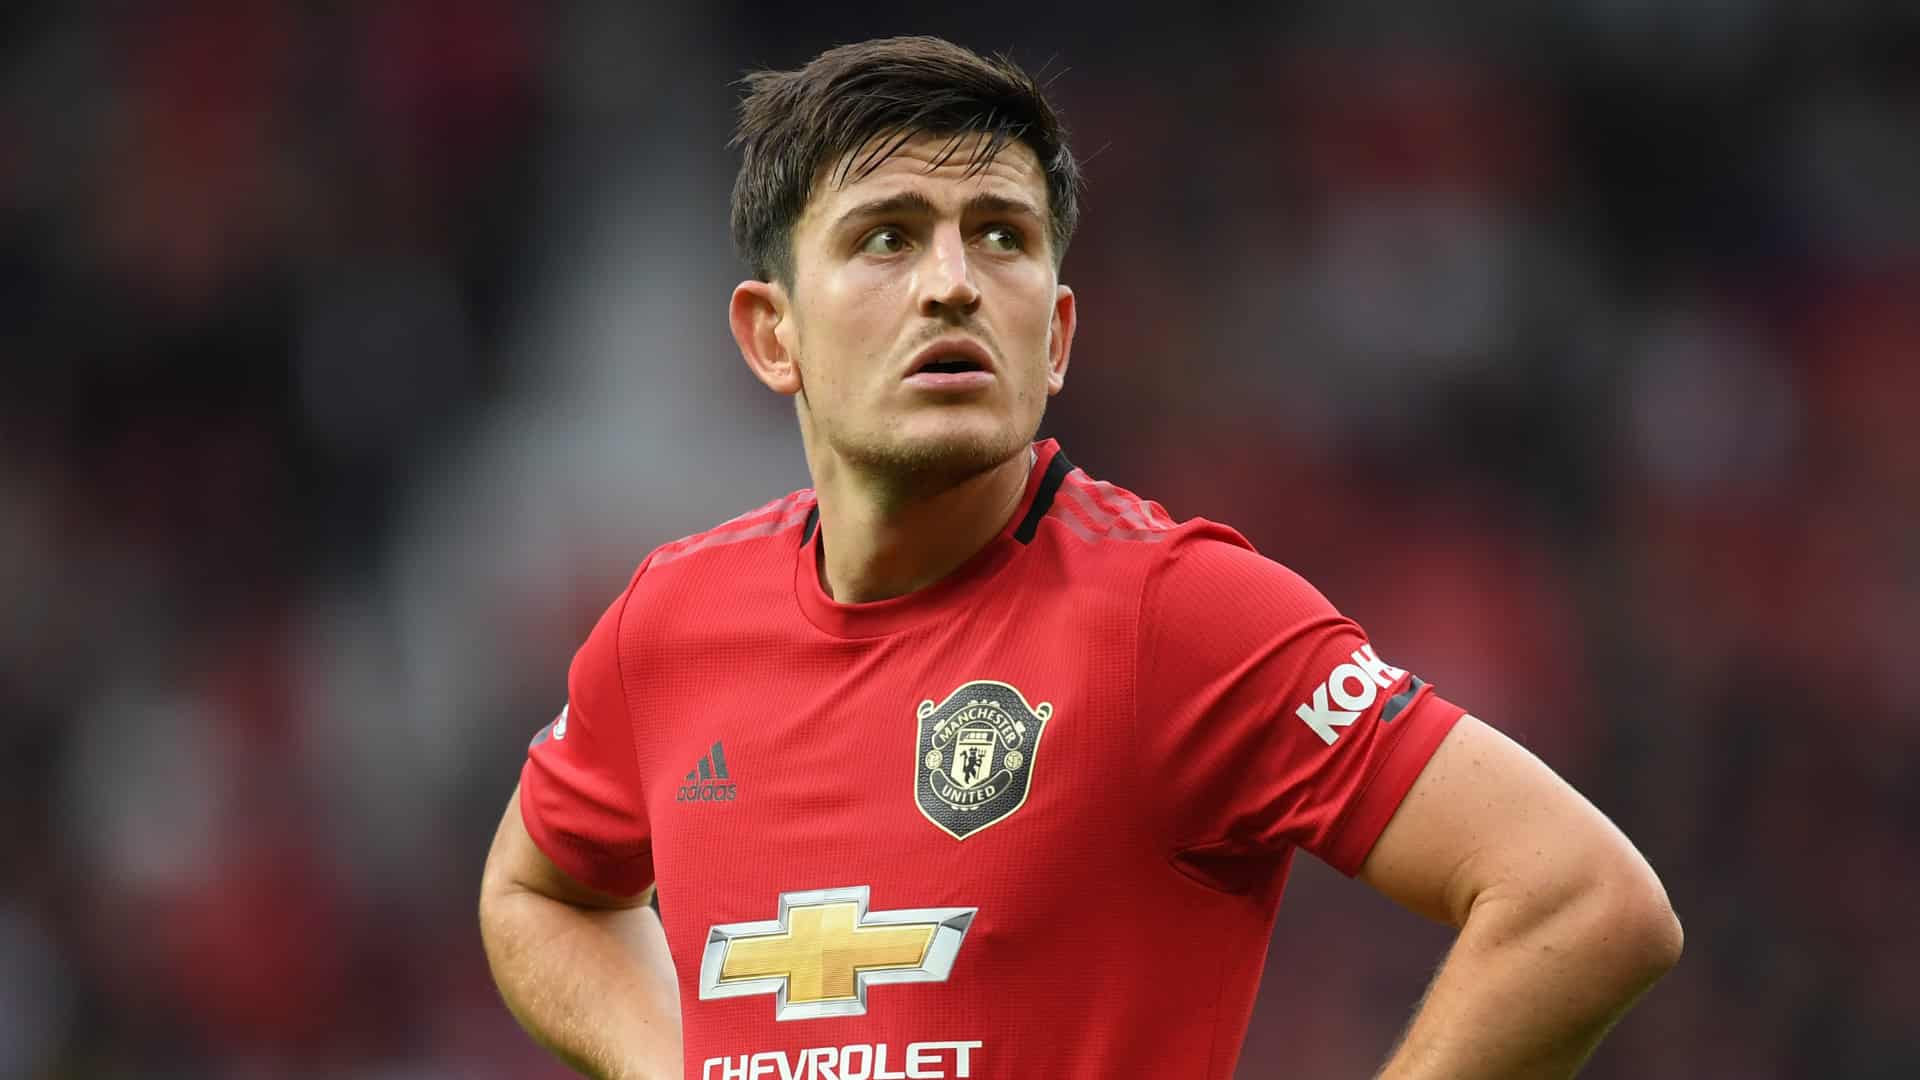 harry-maguire-manchester-united-2019-20_e8mzag08cxdp1qkkedi2pb0he